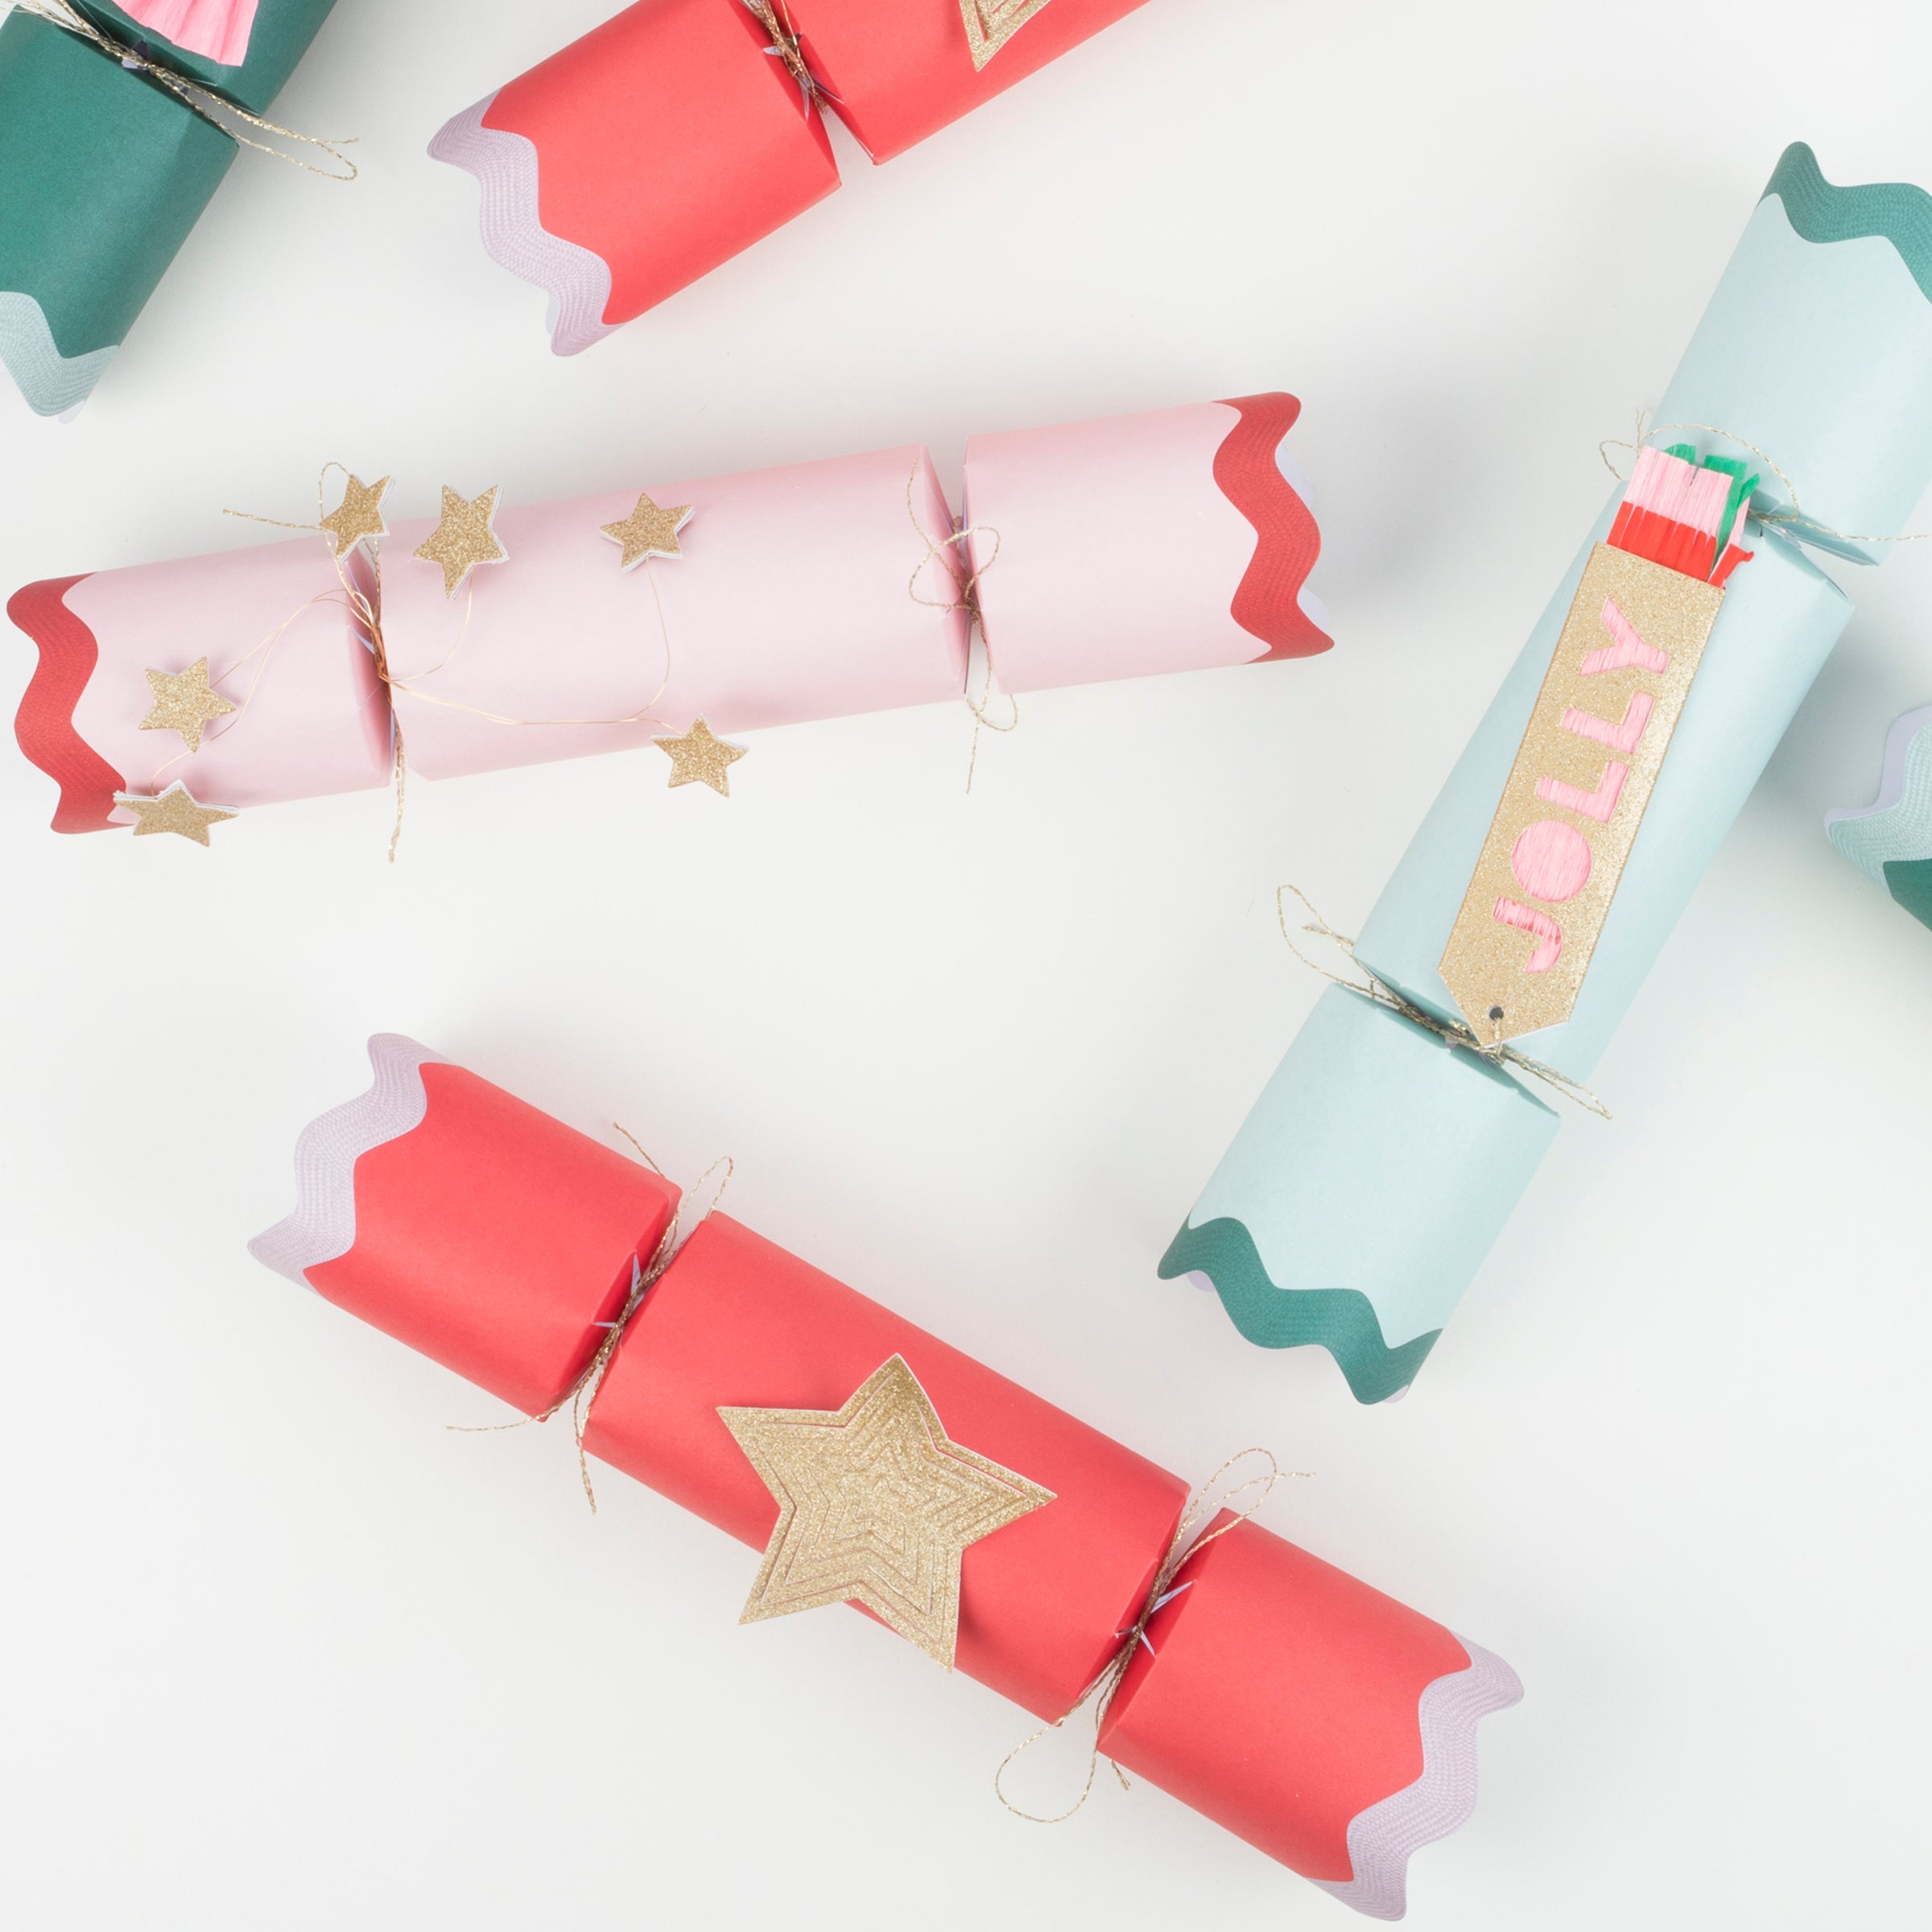 The crackers contain fun erasers for kids, party party hats and jokes.